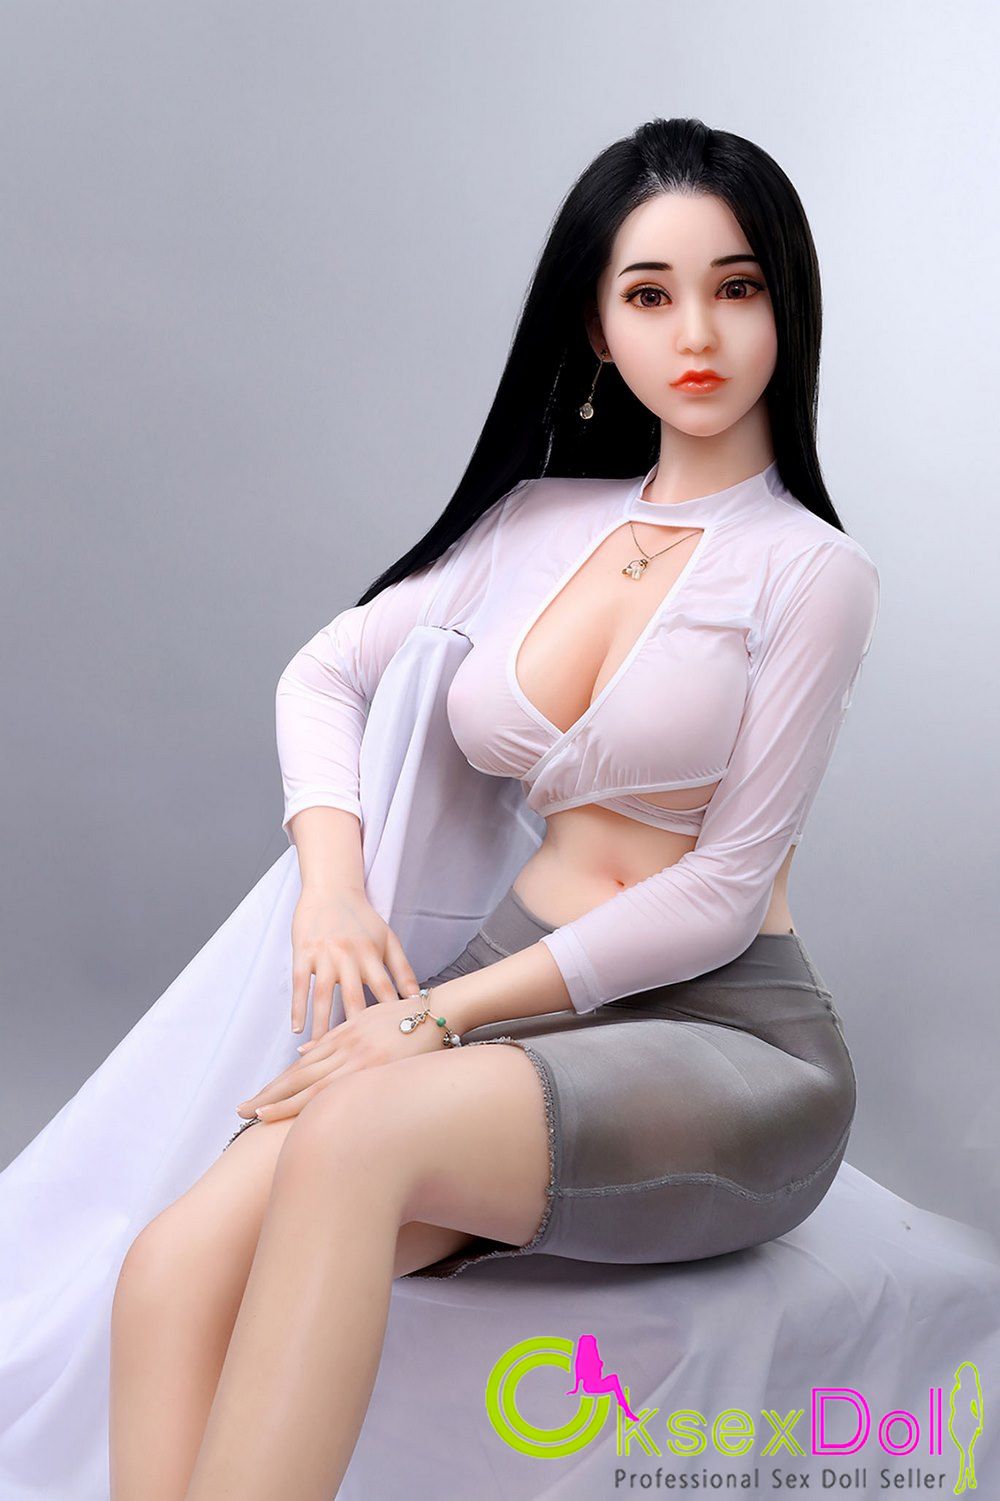 Young Woman Sex Dolls Pictures